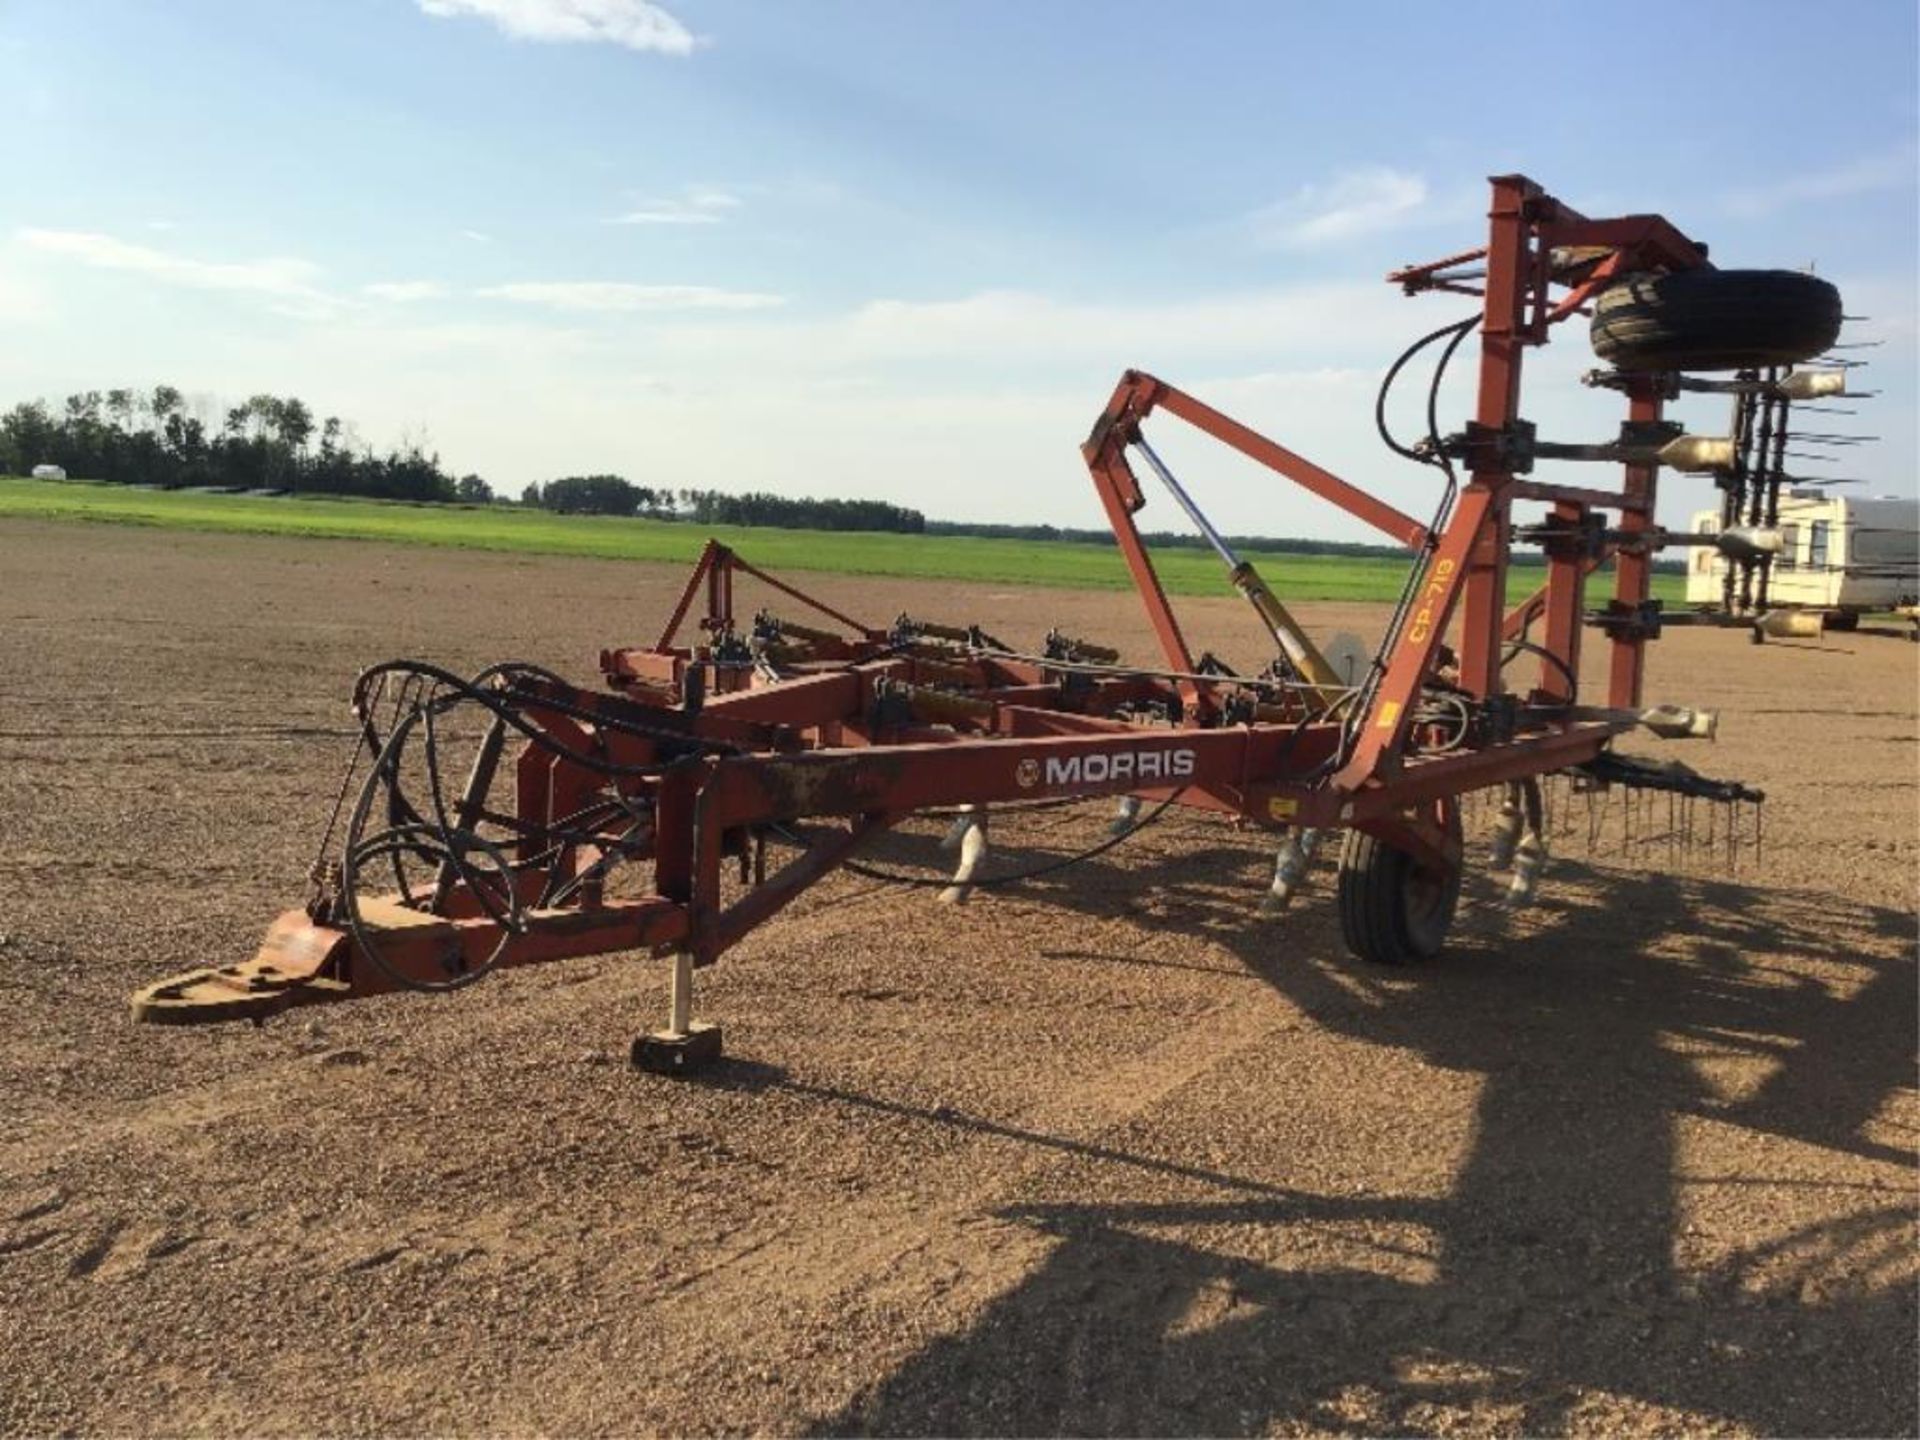 19Ft Morris CP-719 Single Wing Deep Tillage Cultiv 12in Spacing, Low Acres since Cylinders